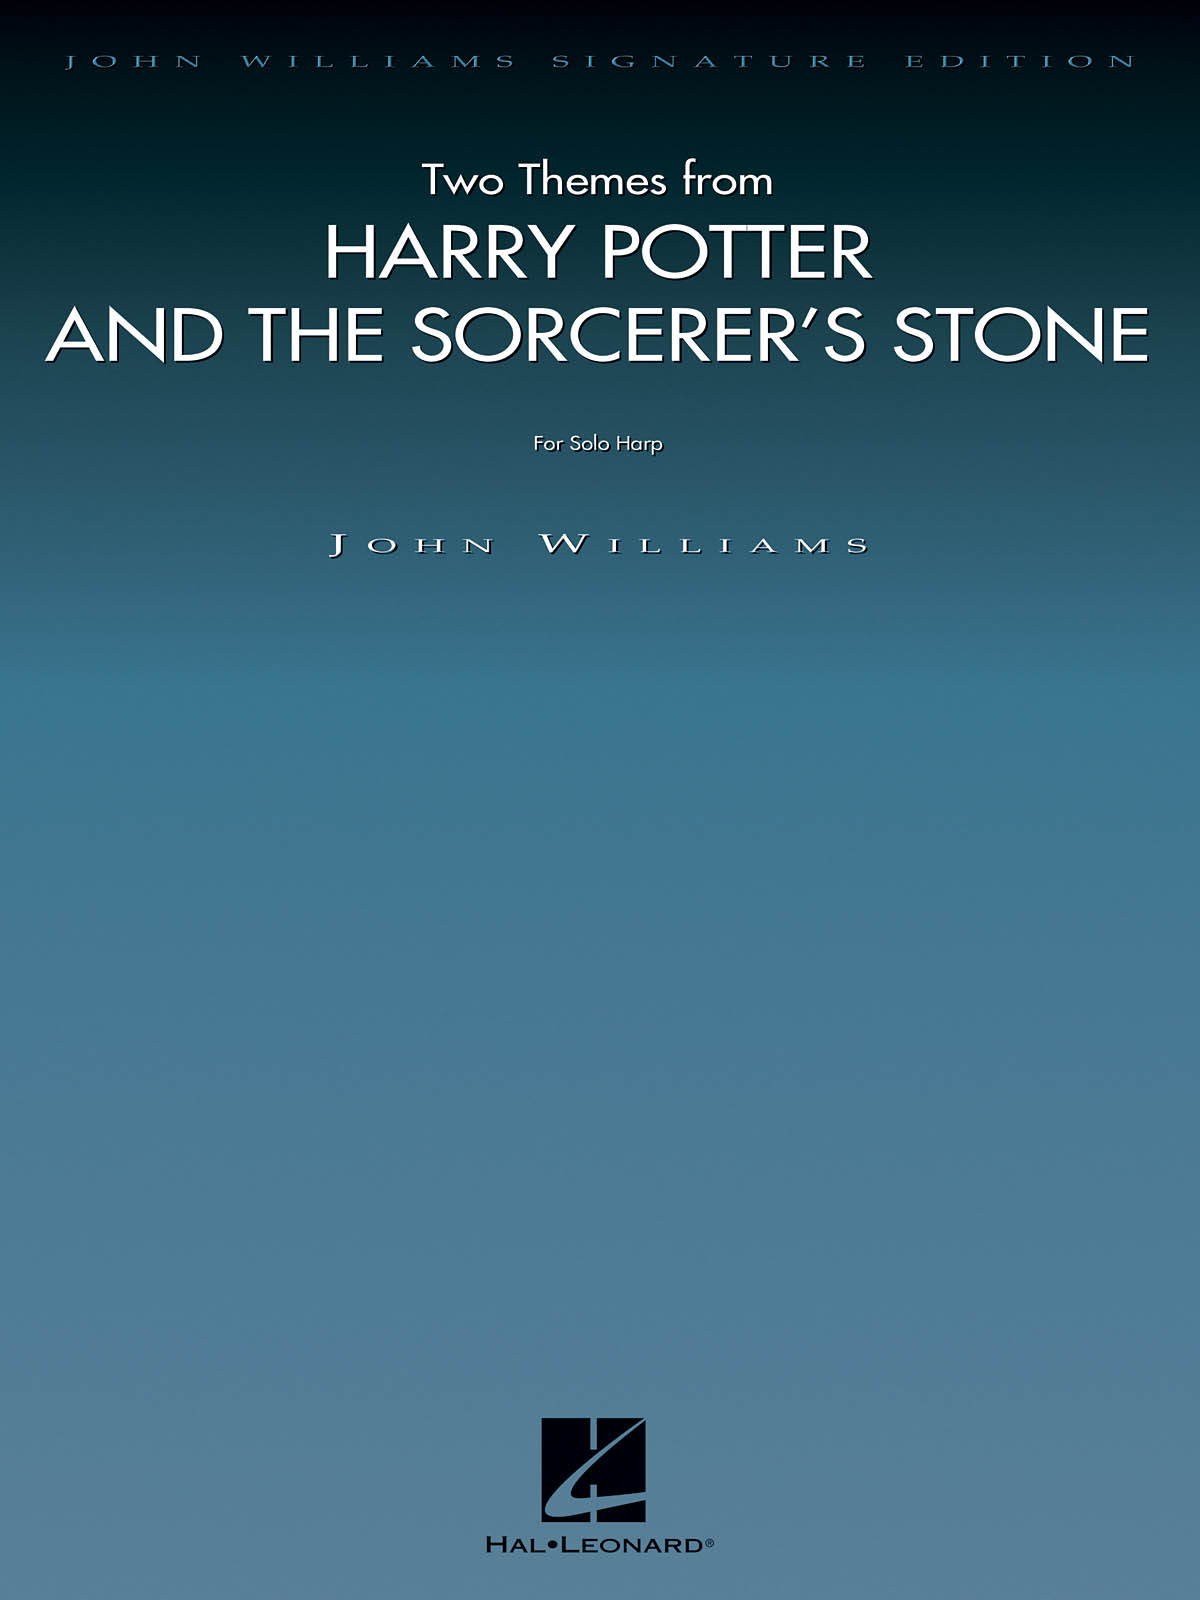 2 Themes from HARRY POTTER & THE SORCERER'S STONE - for Solo Harp